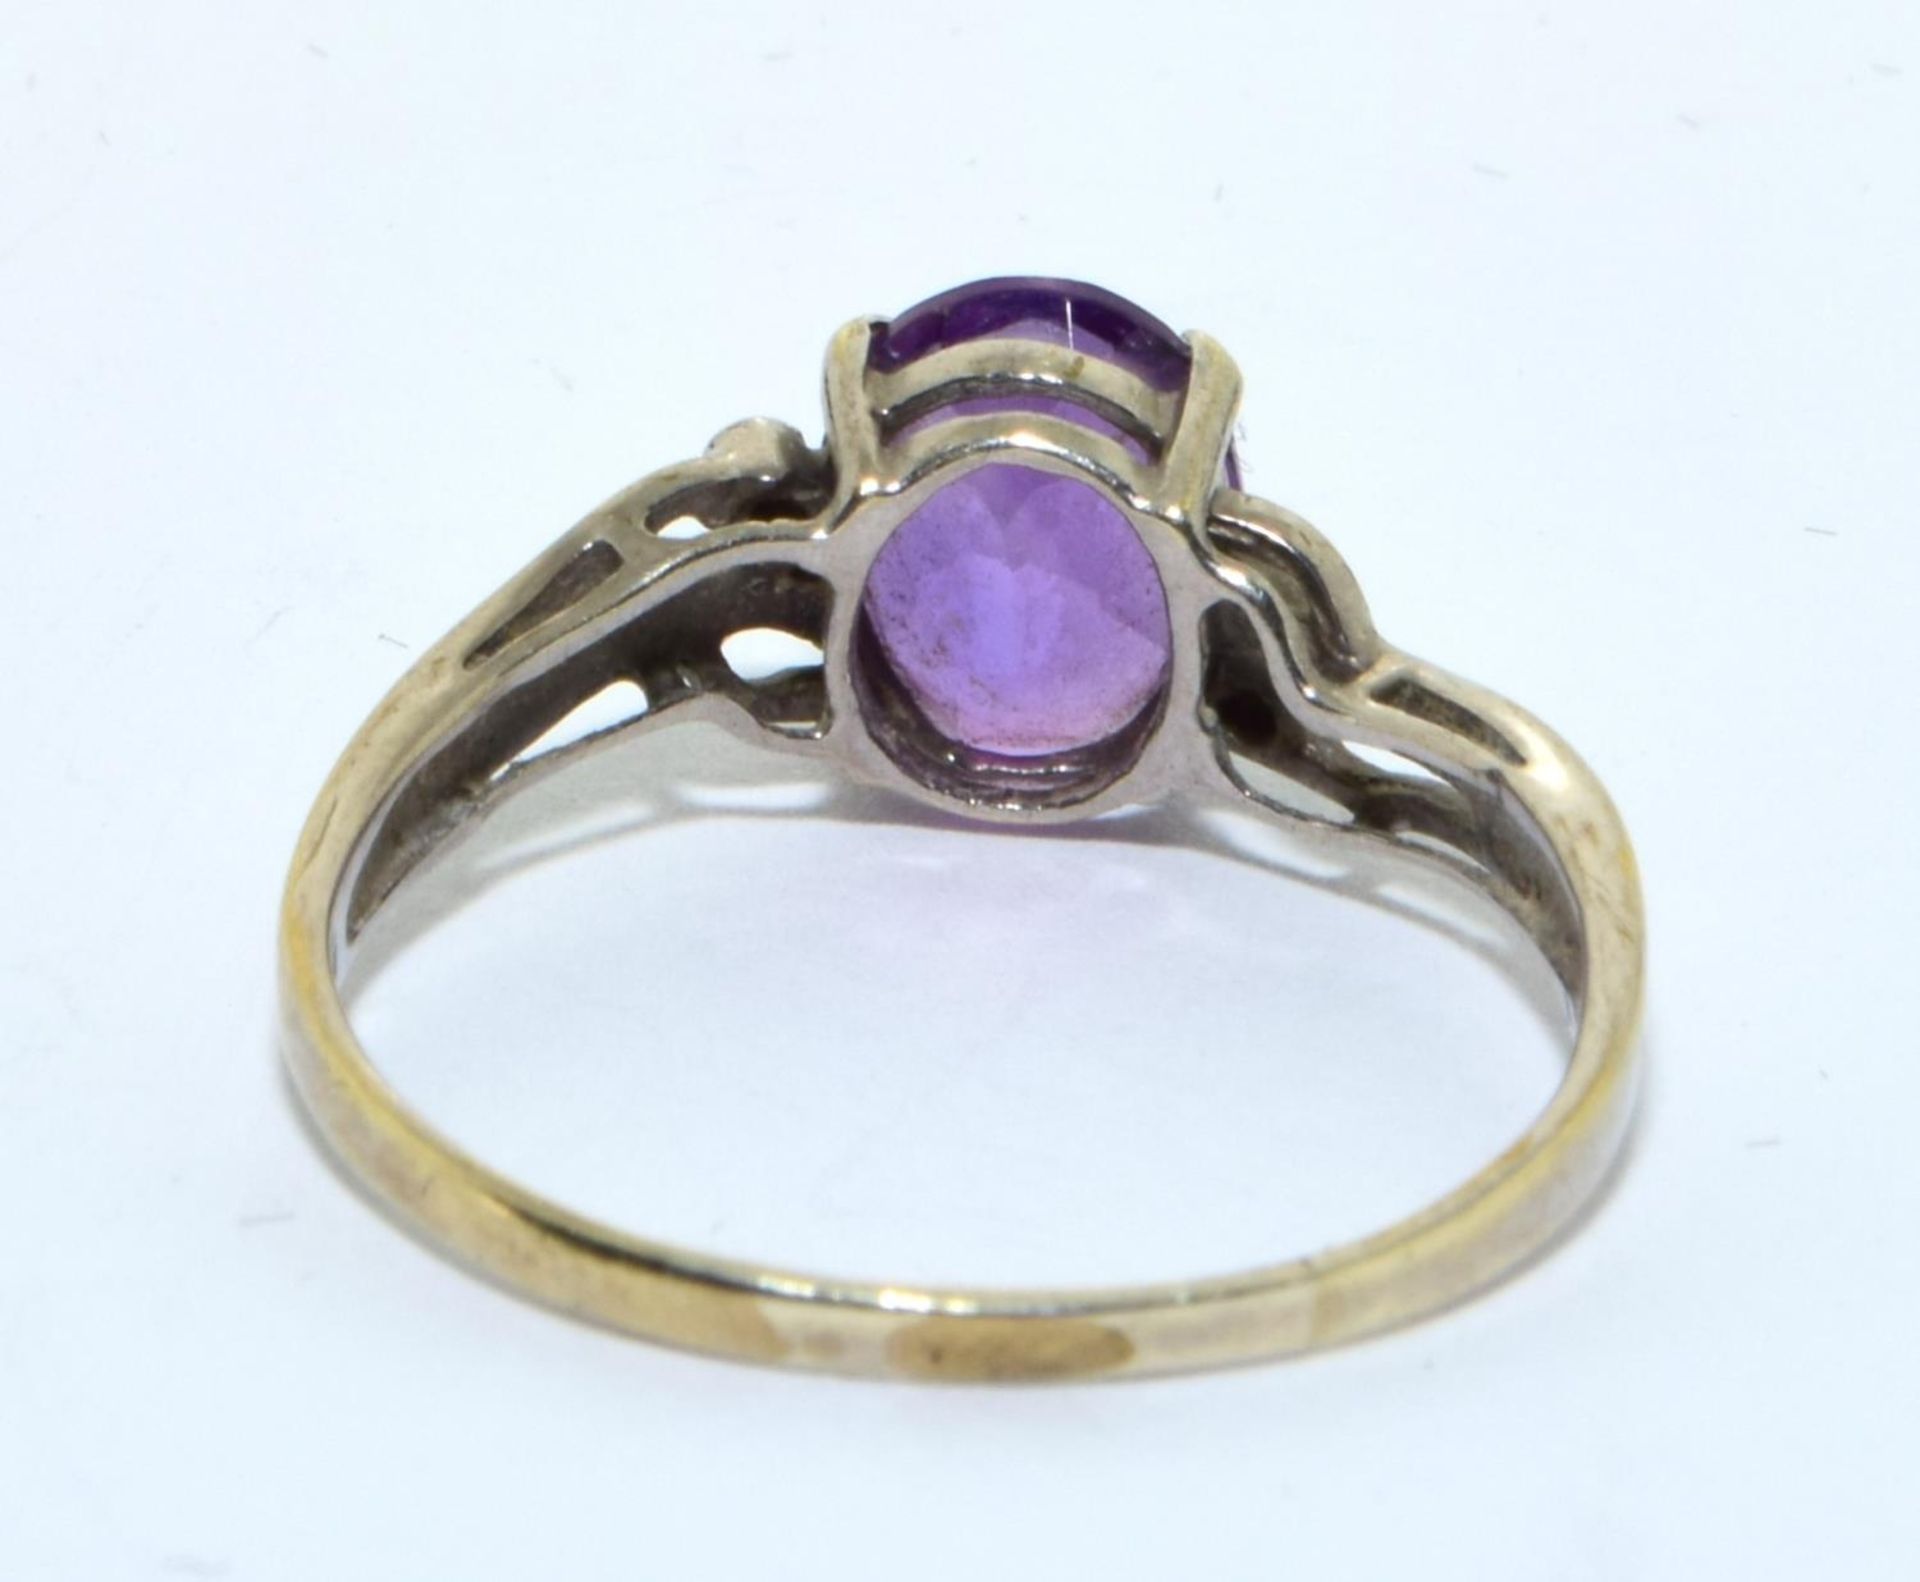 9ct white gold ladies Amethyst and diamond open work setting ring size S - Image 3 of 5